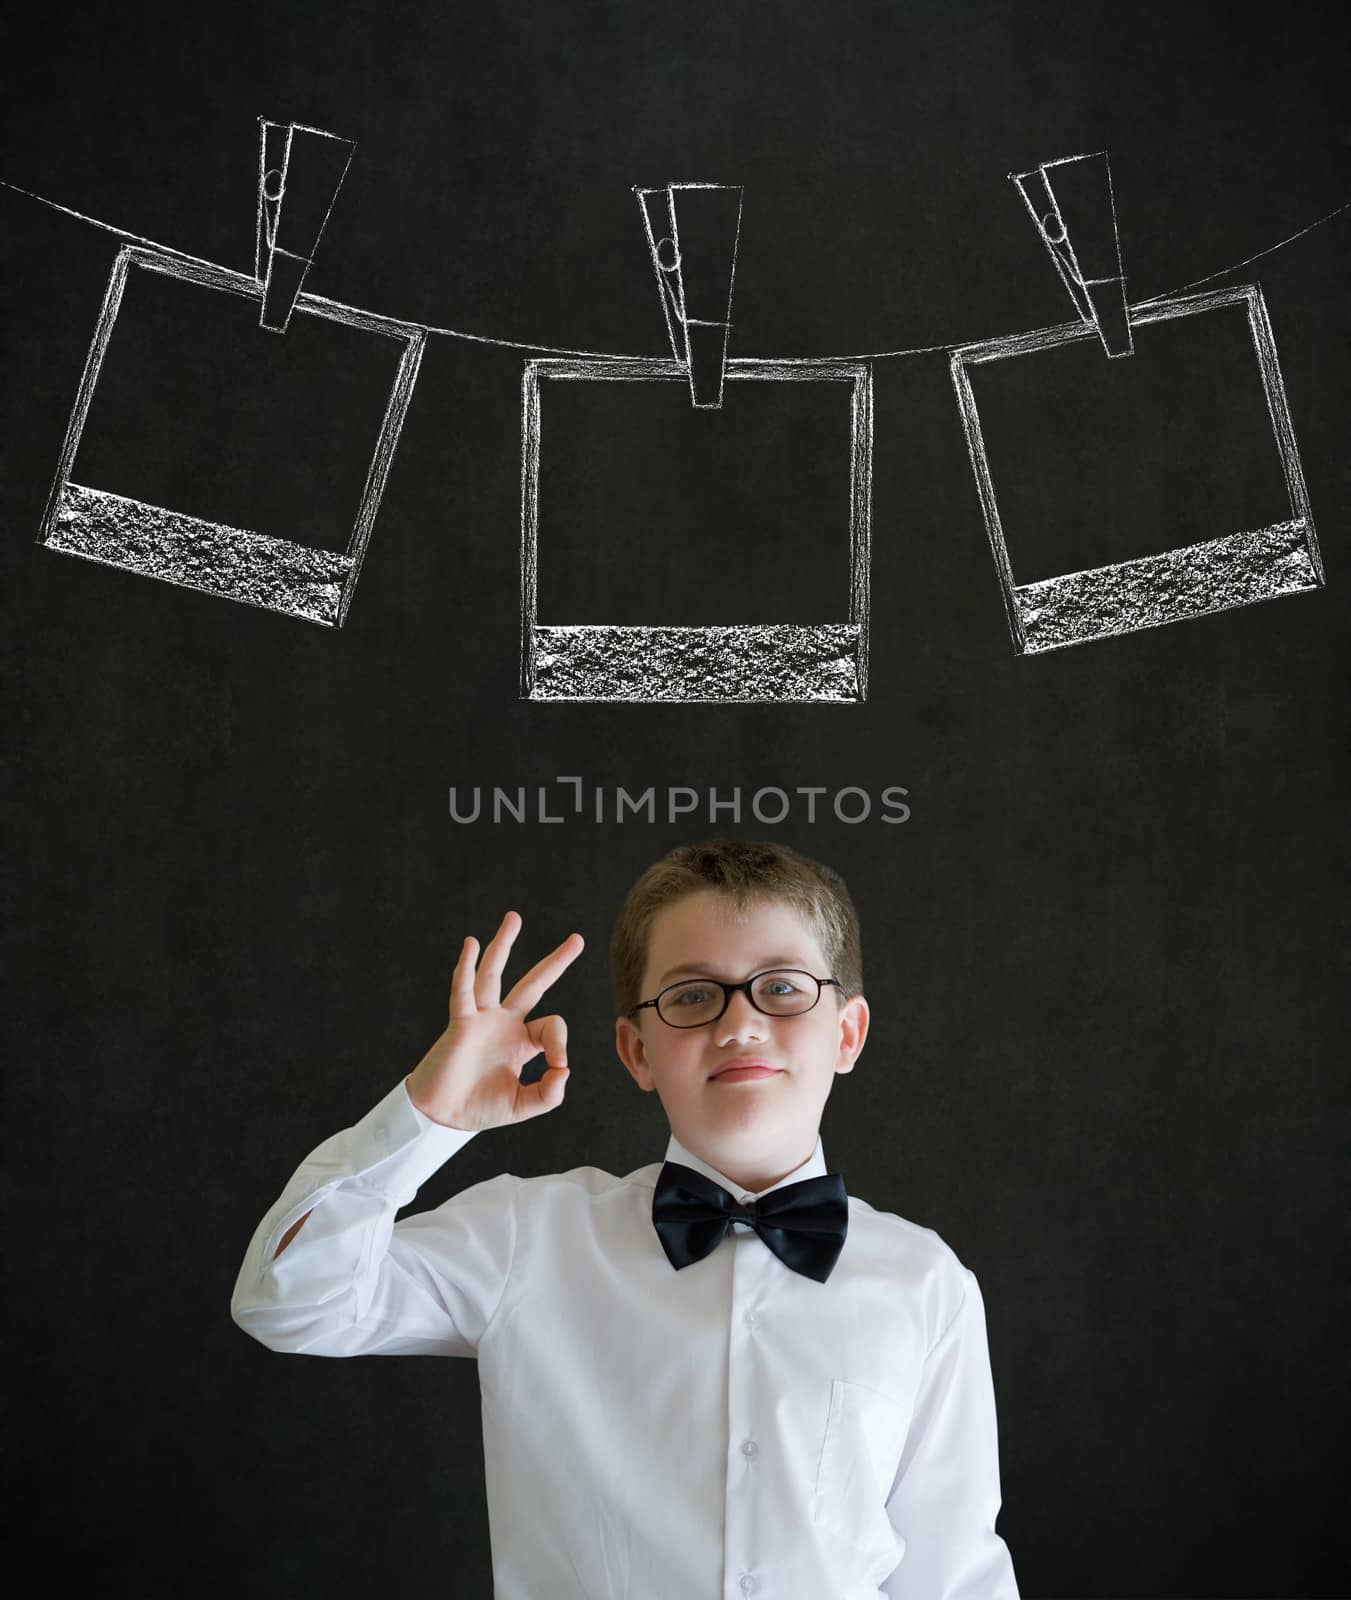 All ok boy business man with hanging instant photo photograph on clothes line by alistaircotton